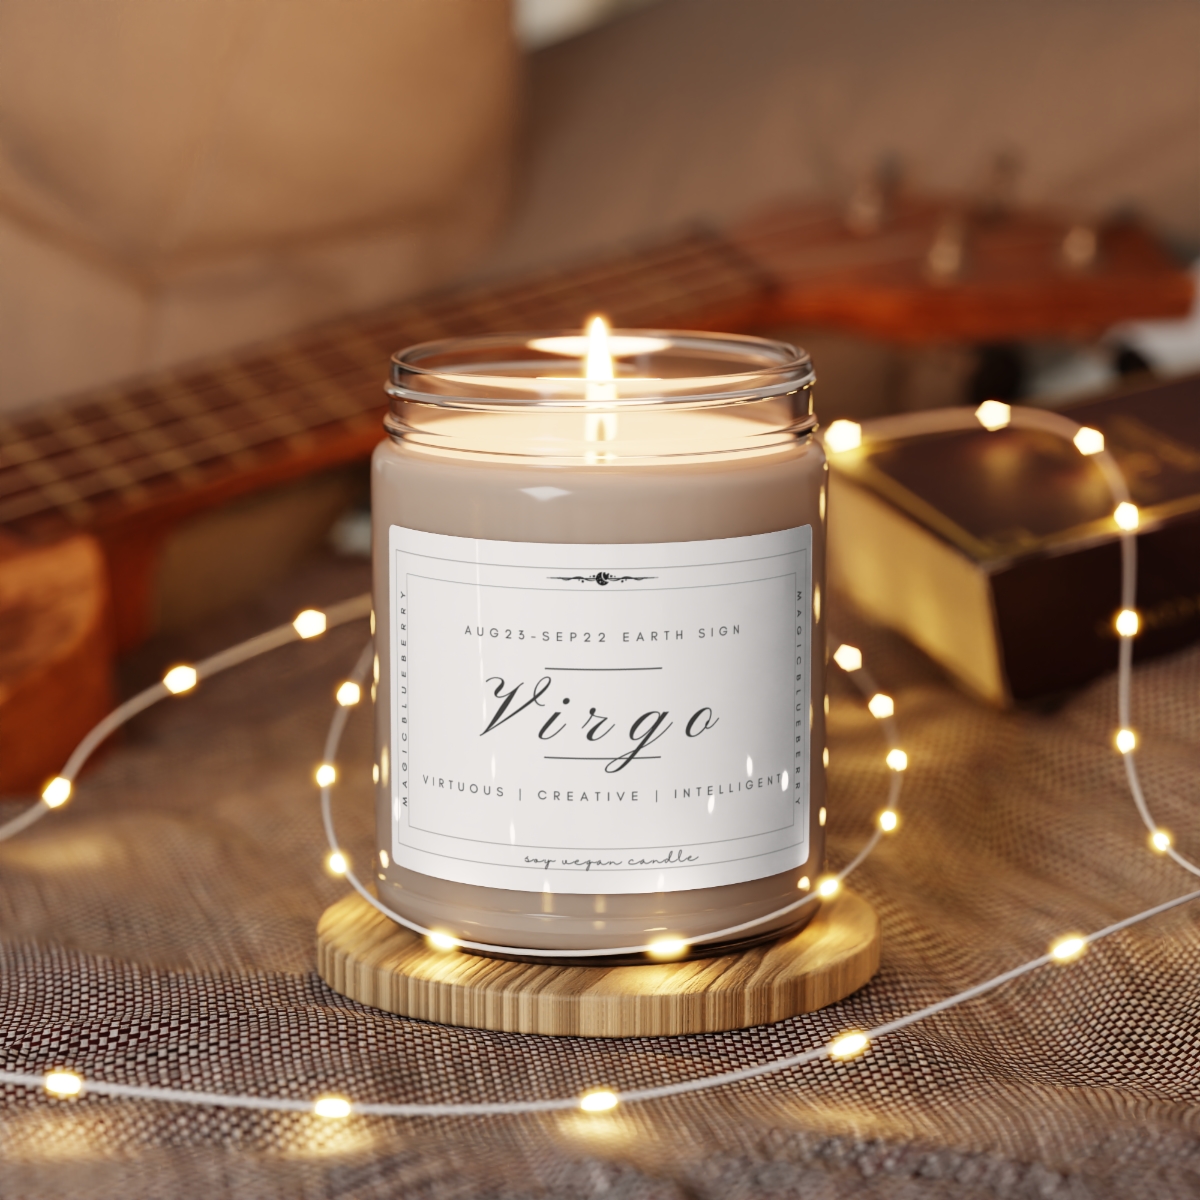 Virgo - Scented Vegan Soy Wax Candle Clear Jar Candle, Spell Candle, Sassy Candle Vegan Candle Cotton Wick Candle Home Deco product main image